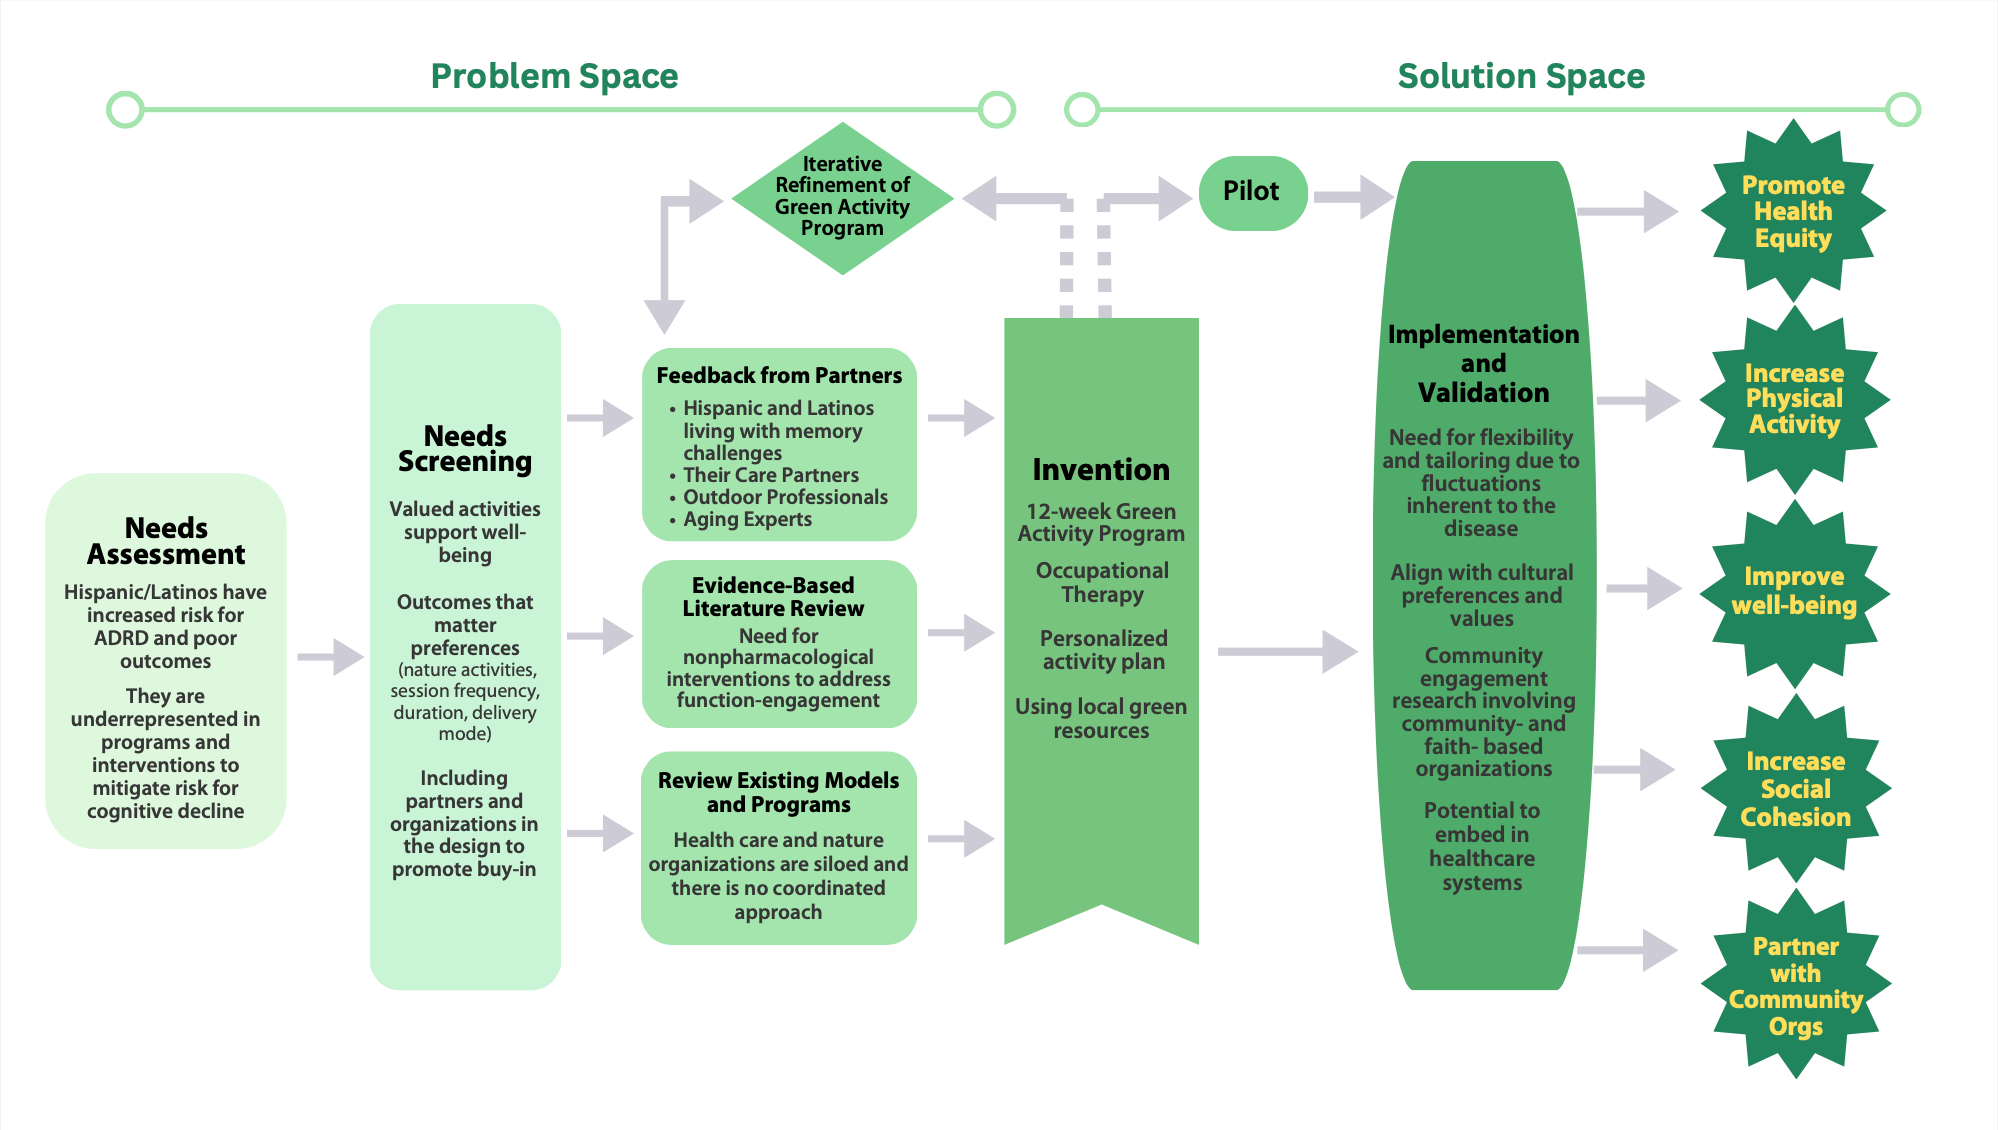 Figure. Applying the Innovation Biodesign Framework to the development of a Green Activity Program for patients with Alzheimer’s disease and related dementias.

(Click to enlarge)